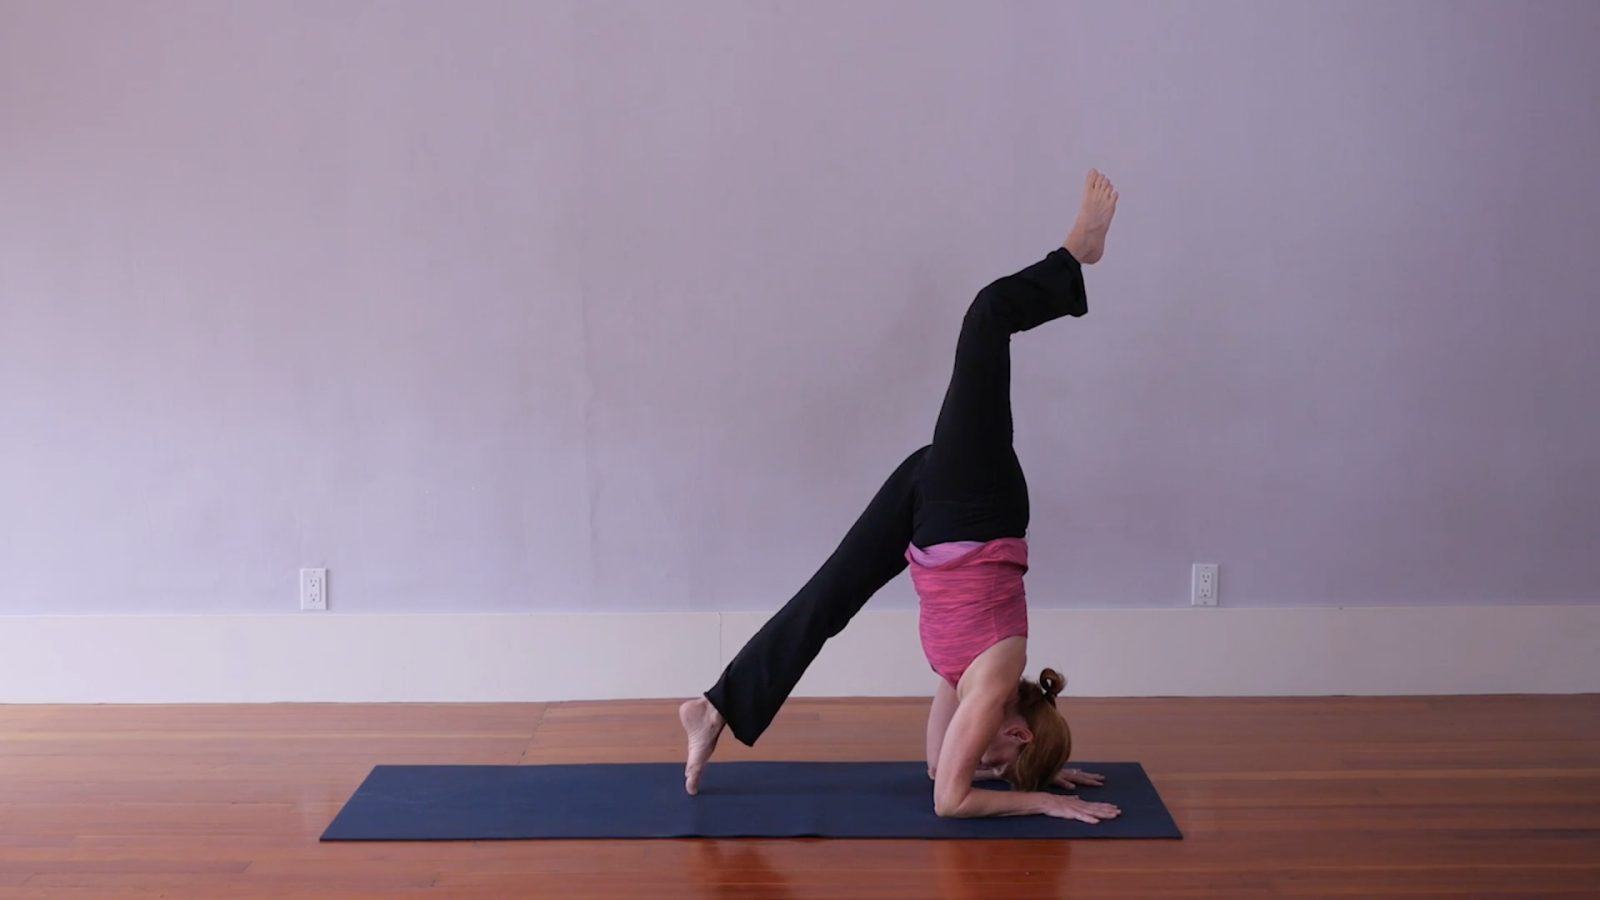 One Quick Tip for Sticking Your Forearmstand